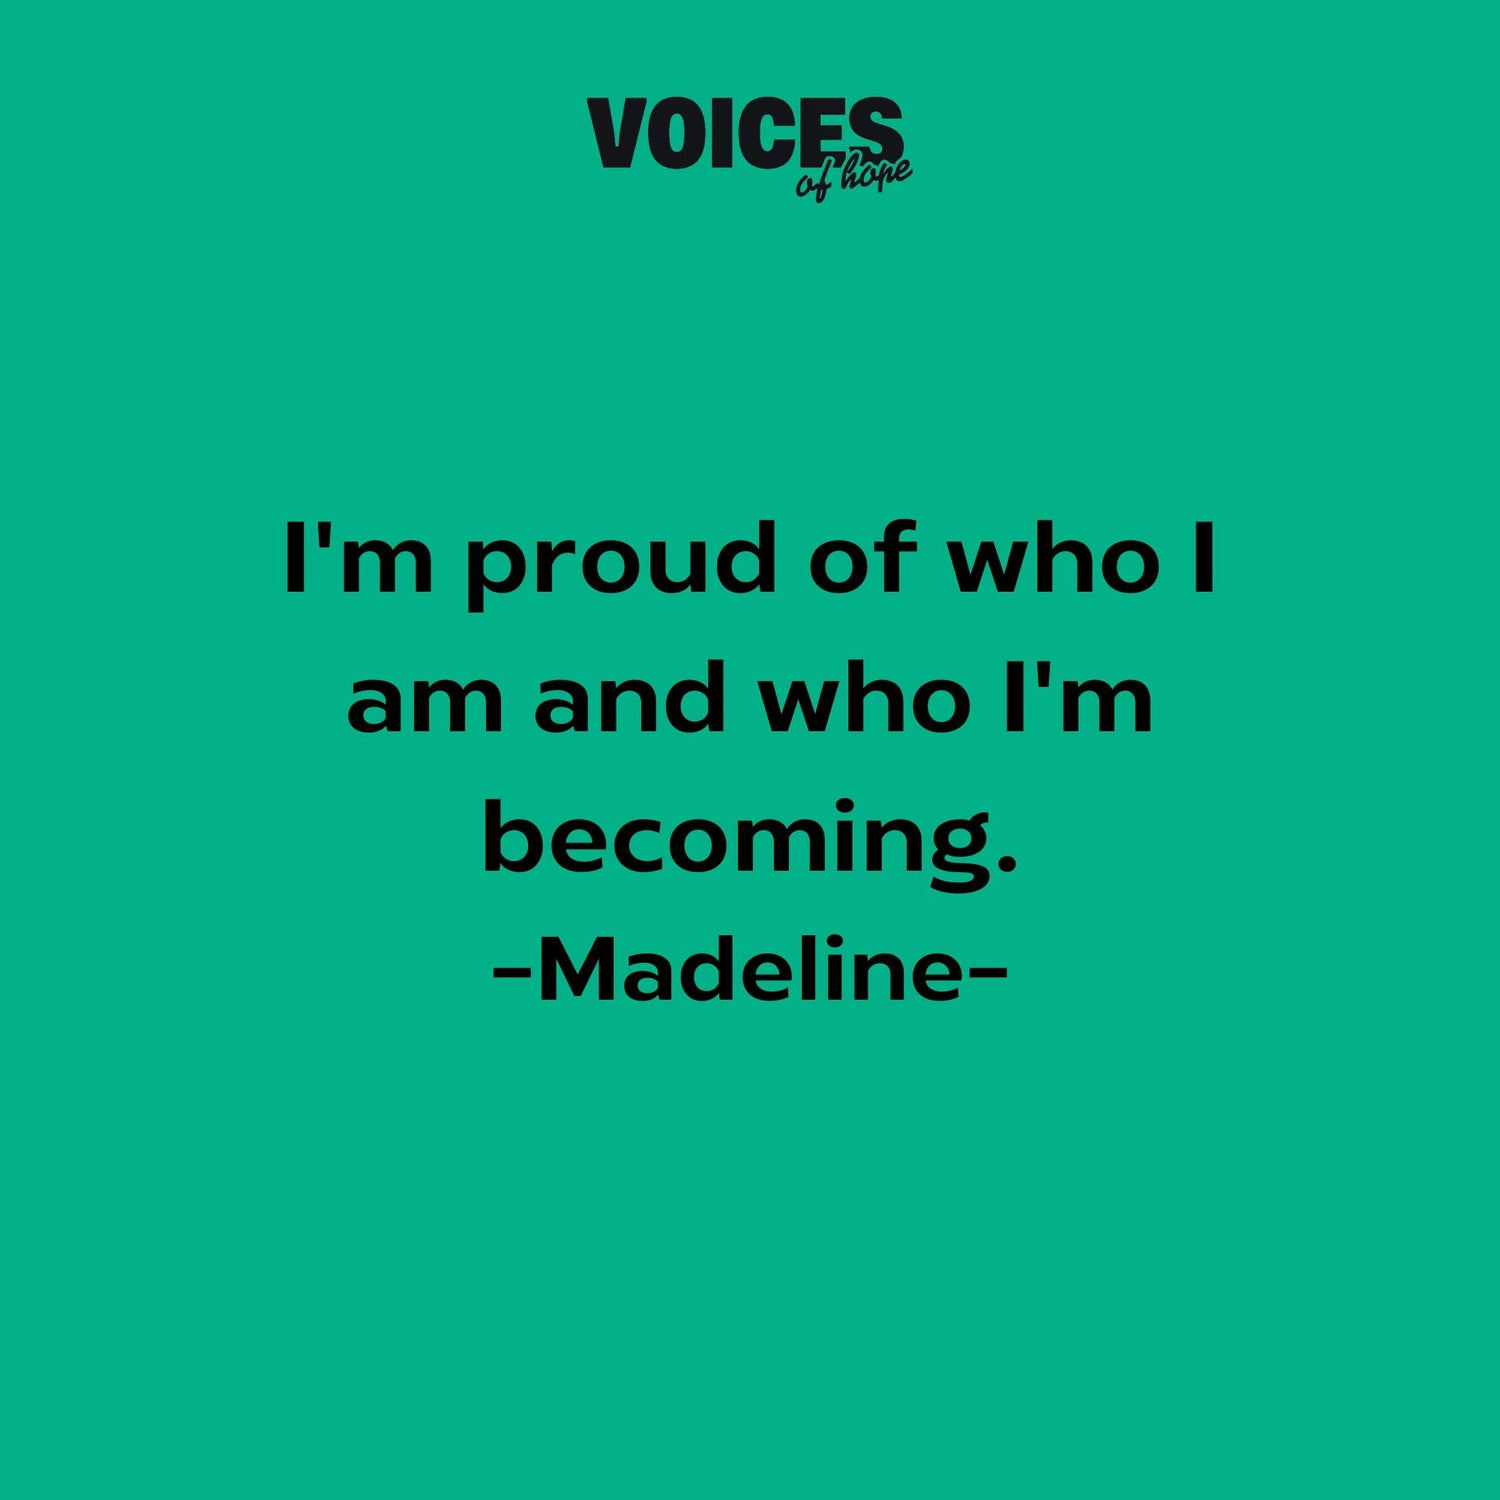 Green background with black writing that reads: "I'm proud of who I am and who I'm becoming. Madeline."